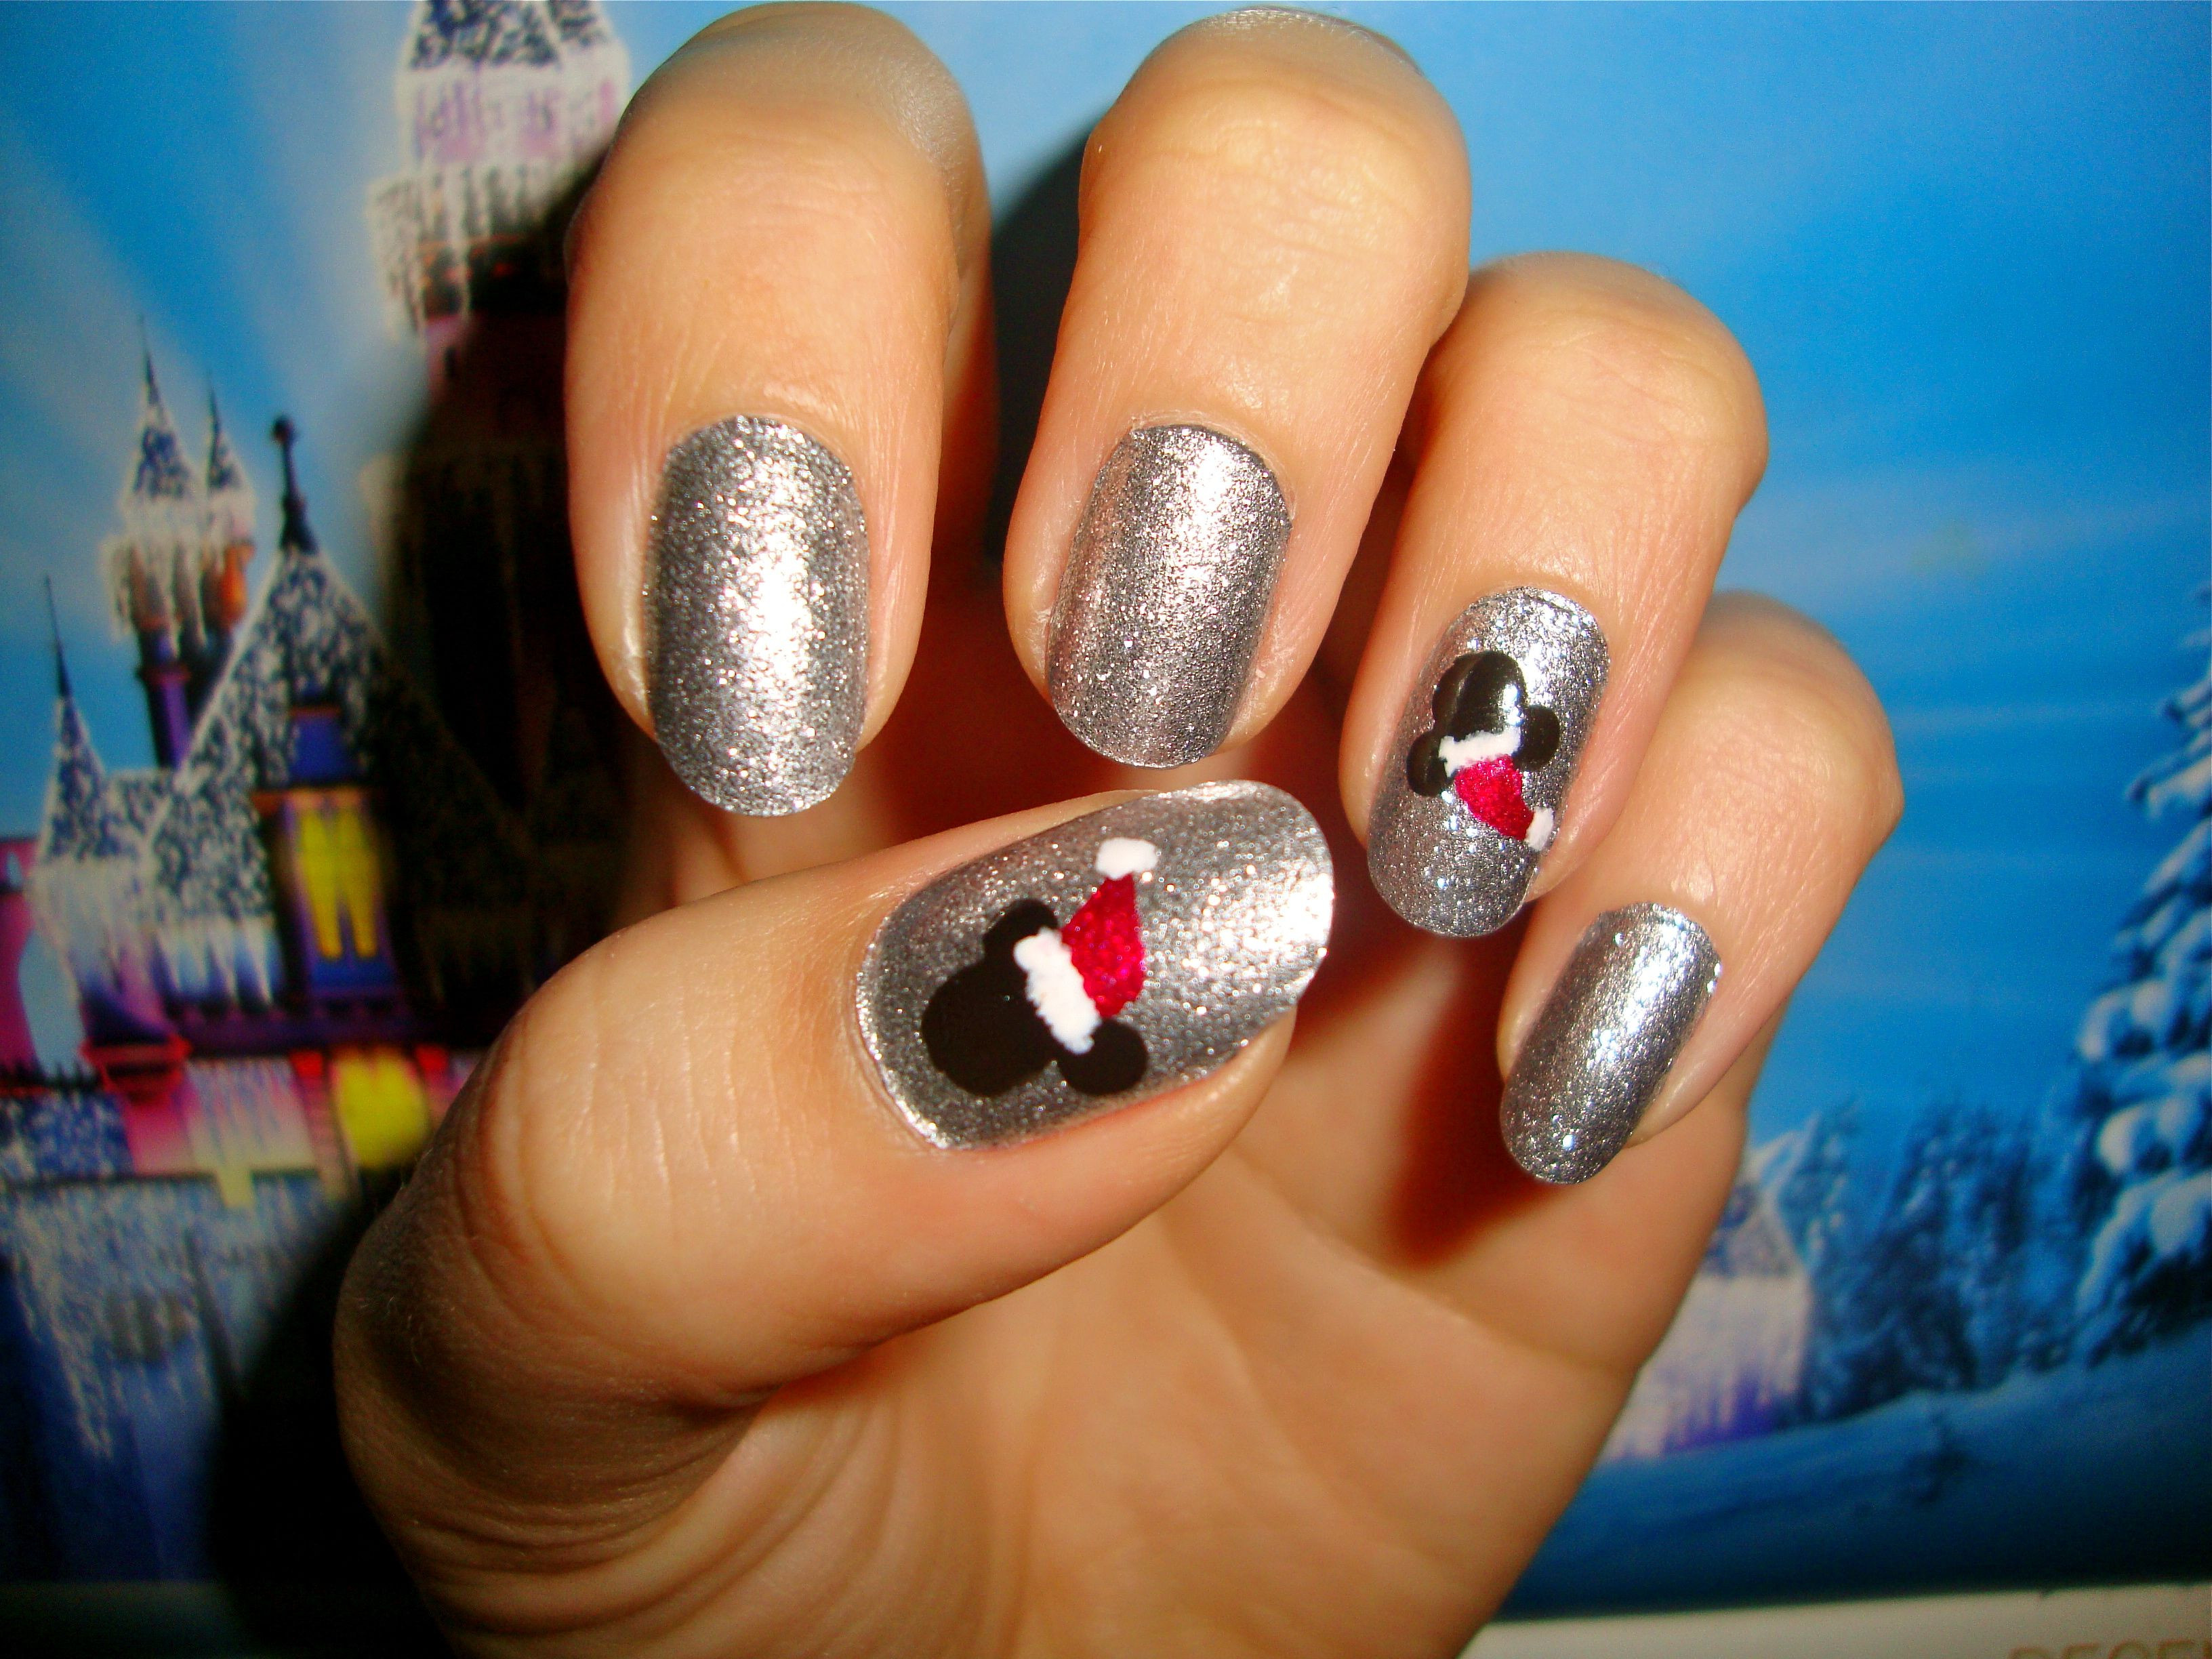 Nageldesign Urlaub
 Disney Mickey Mouse nails during the holidays D